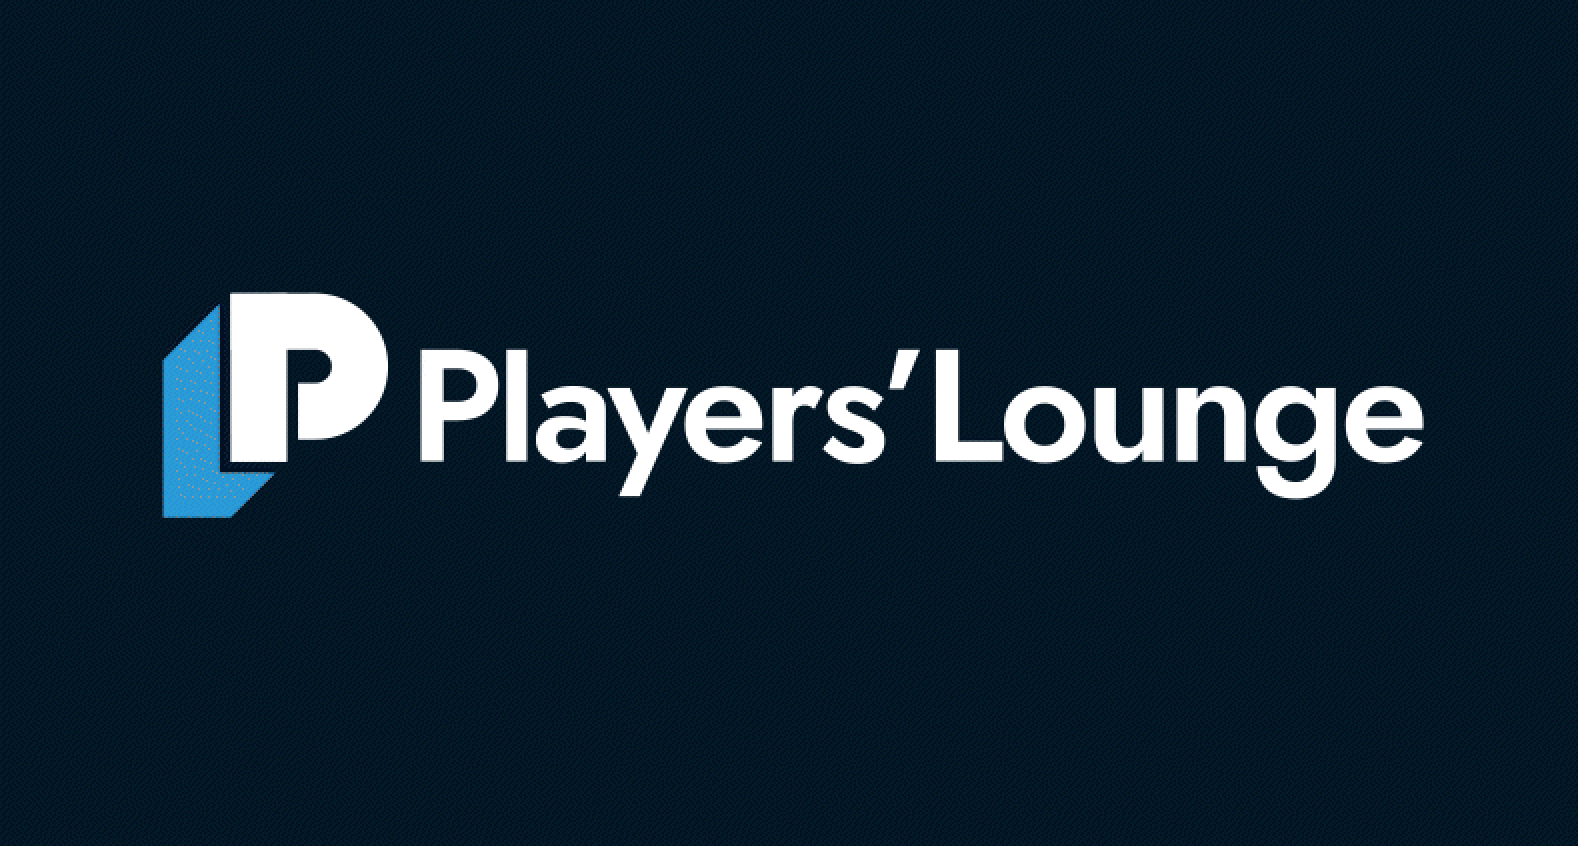 Exclusive: Players' Lounge crosses $150M in skill-based wagers